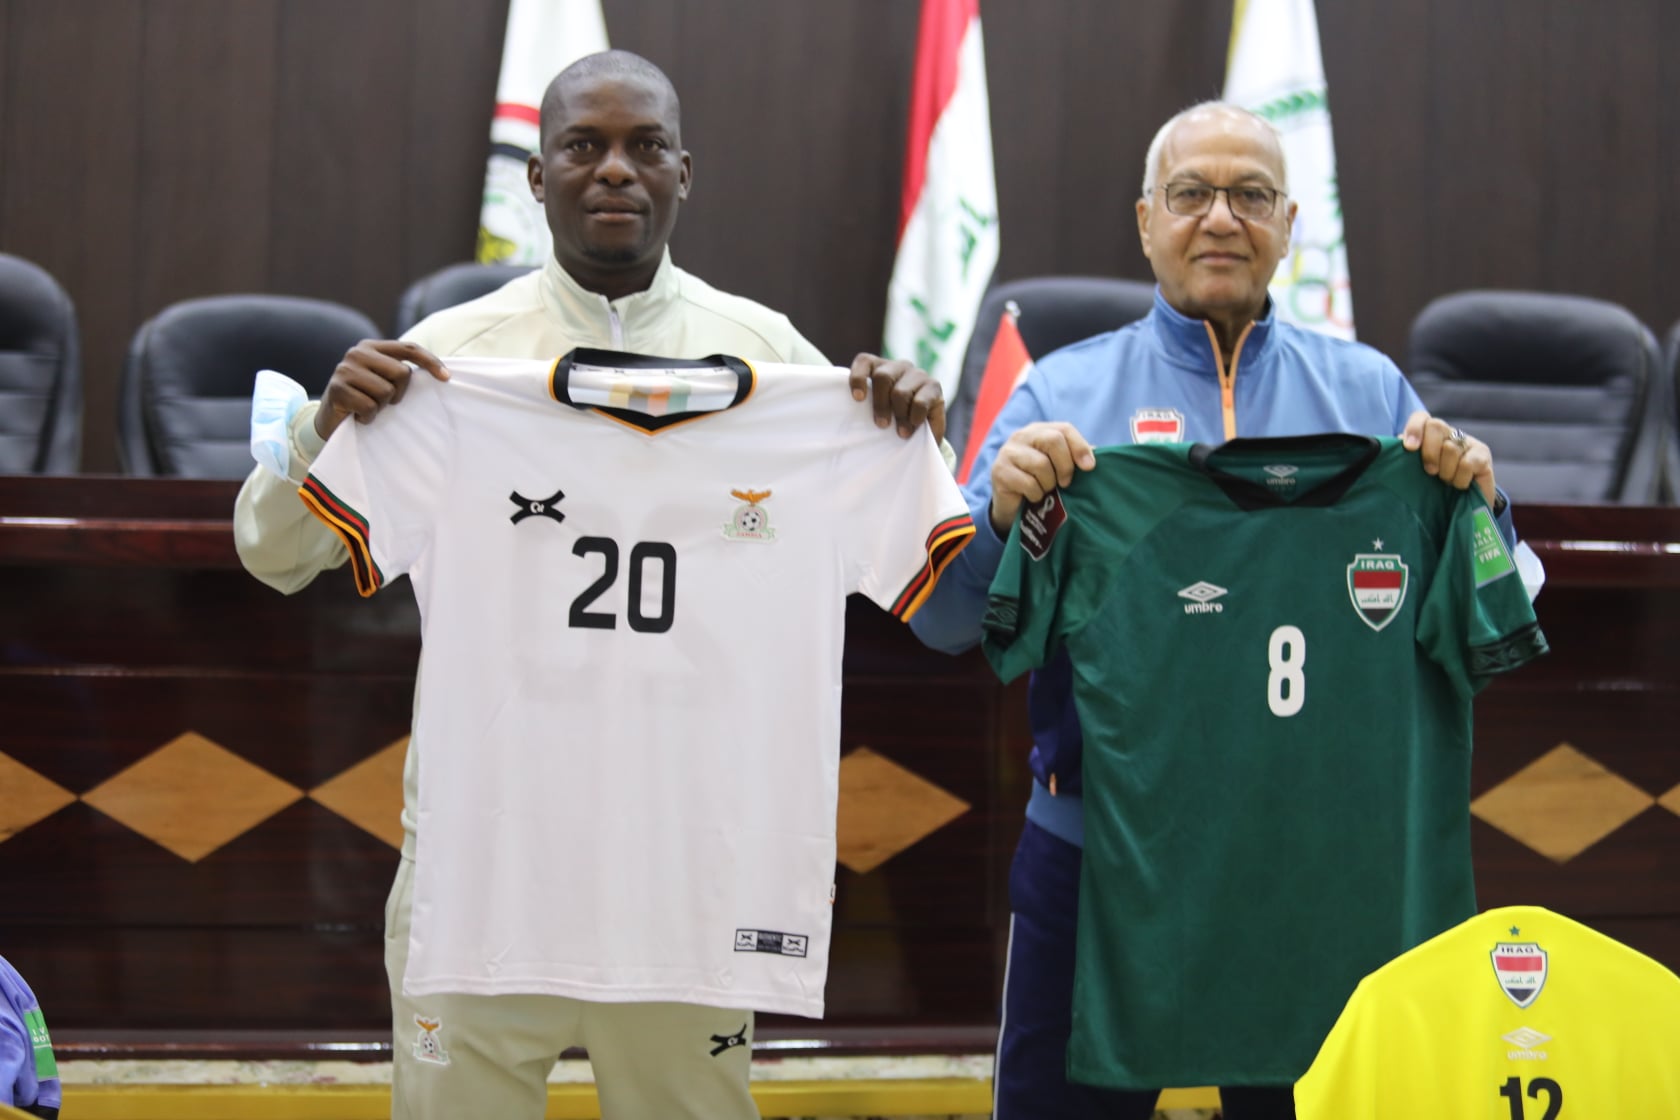 Zambia To Rock / Waer On The White In The Friendly Match Against Iraq | SEE PHOTOTS